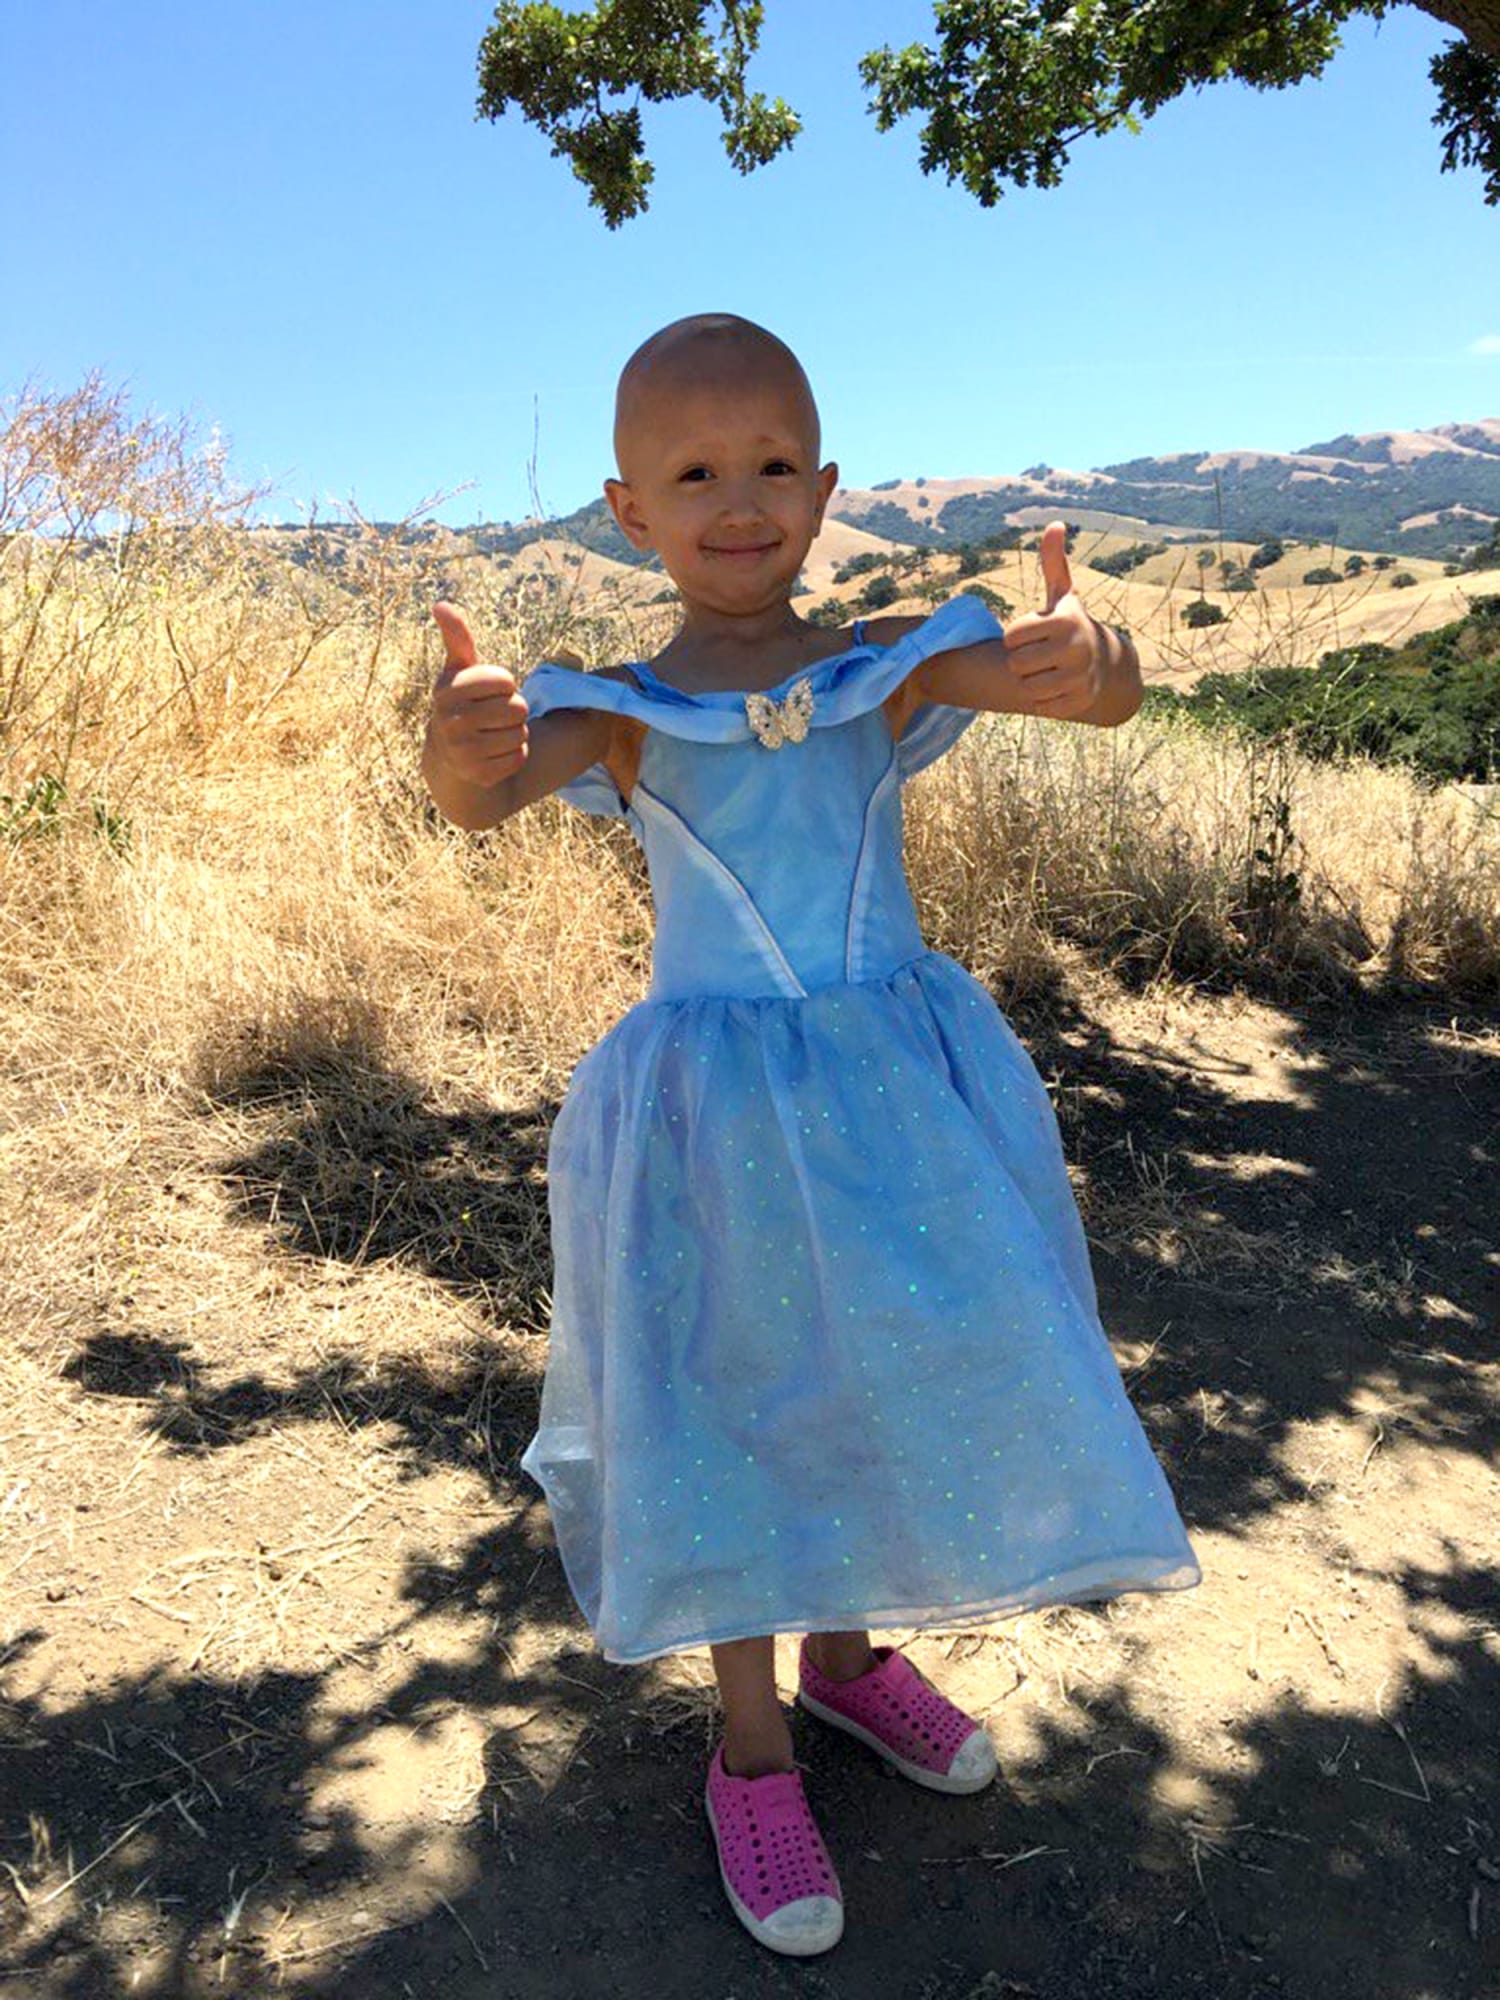 Meet the 4-year-old fashion designer with alopecia who's making trash bags  trendy